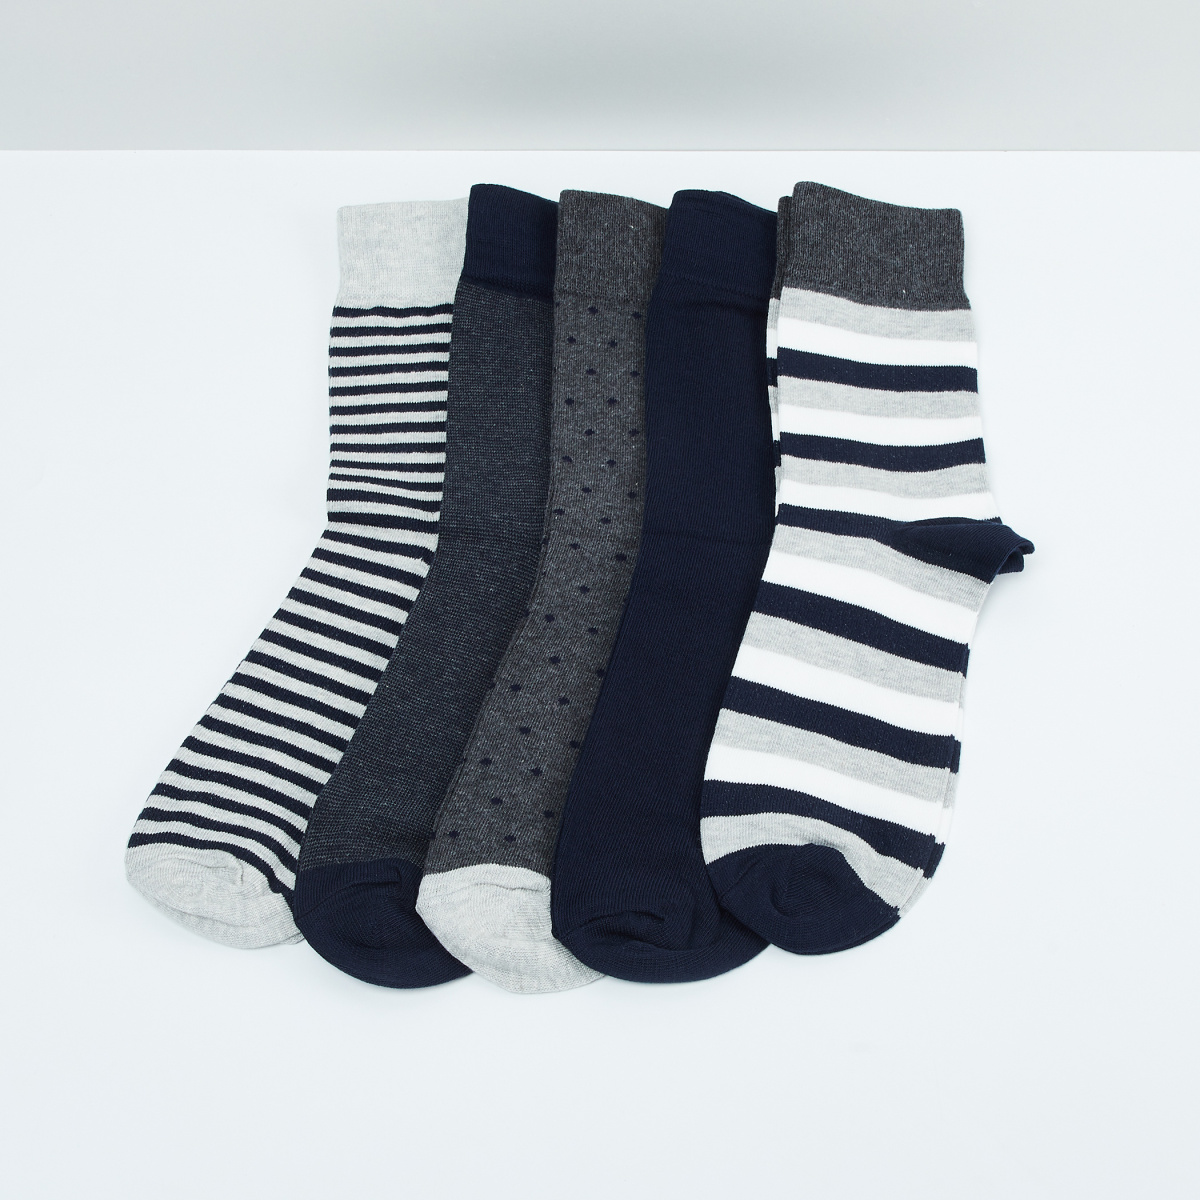 MAX Assorted Socks- Pack of 5